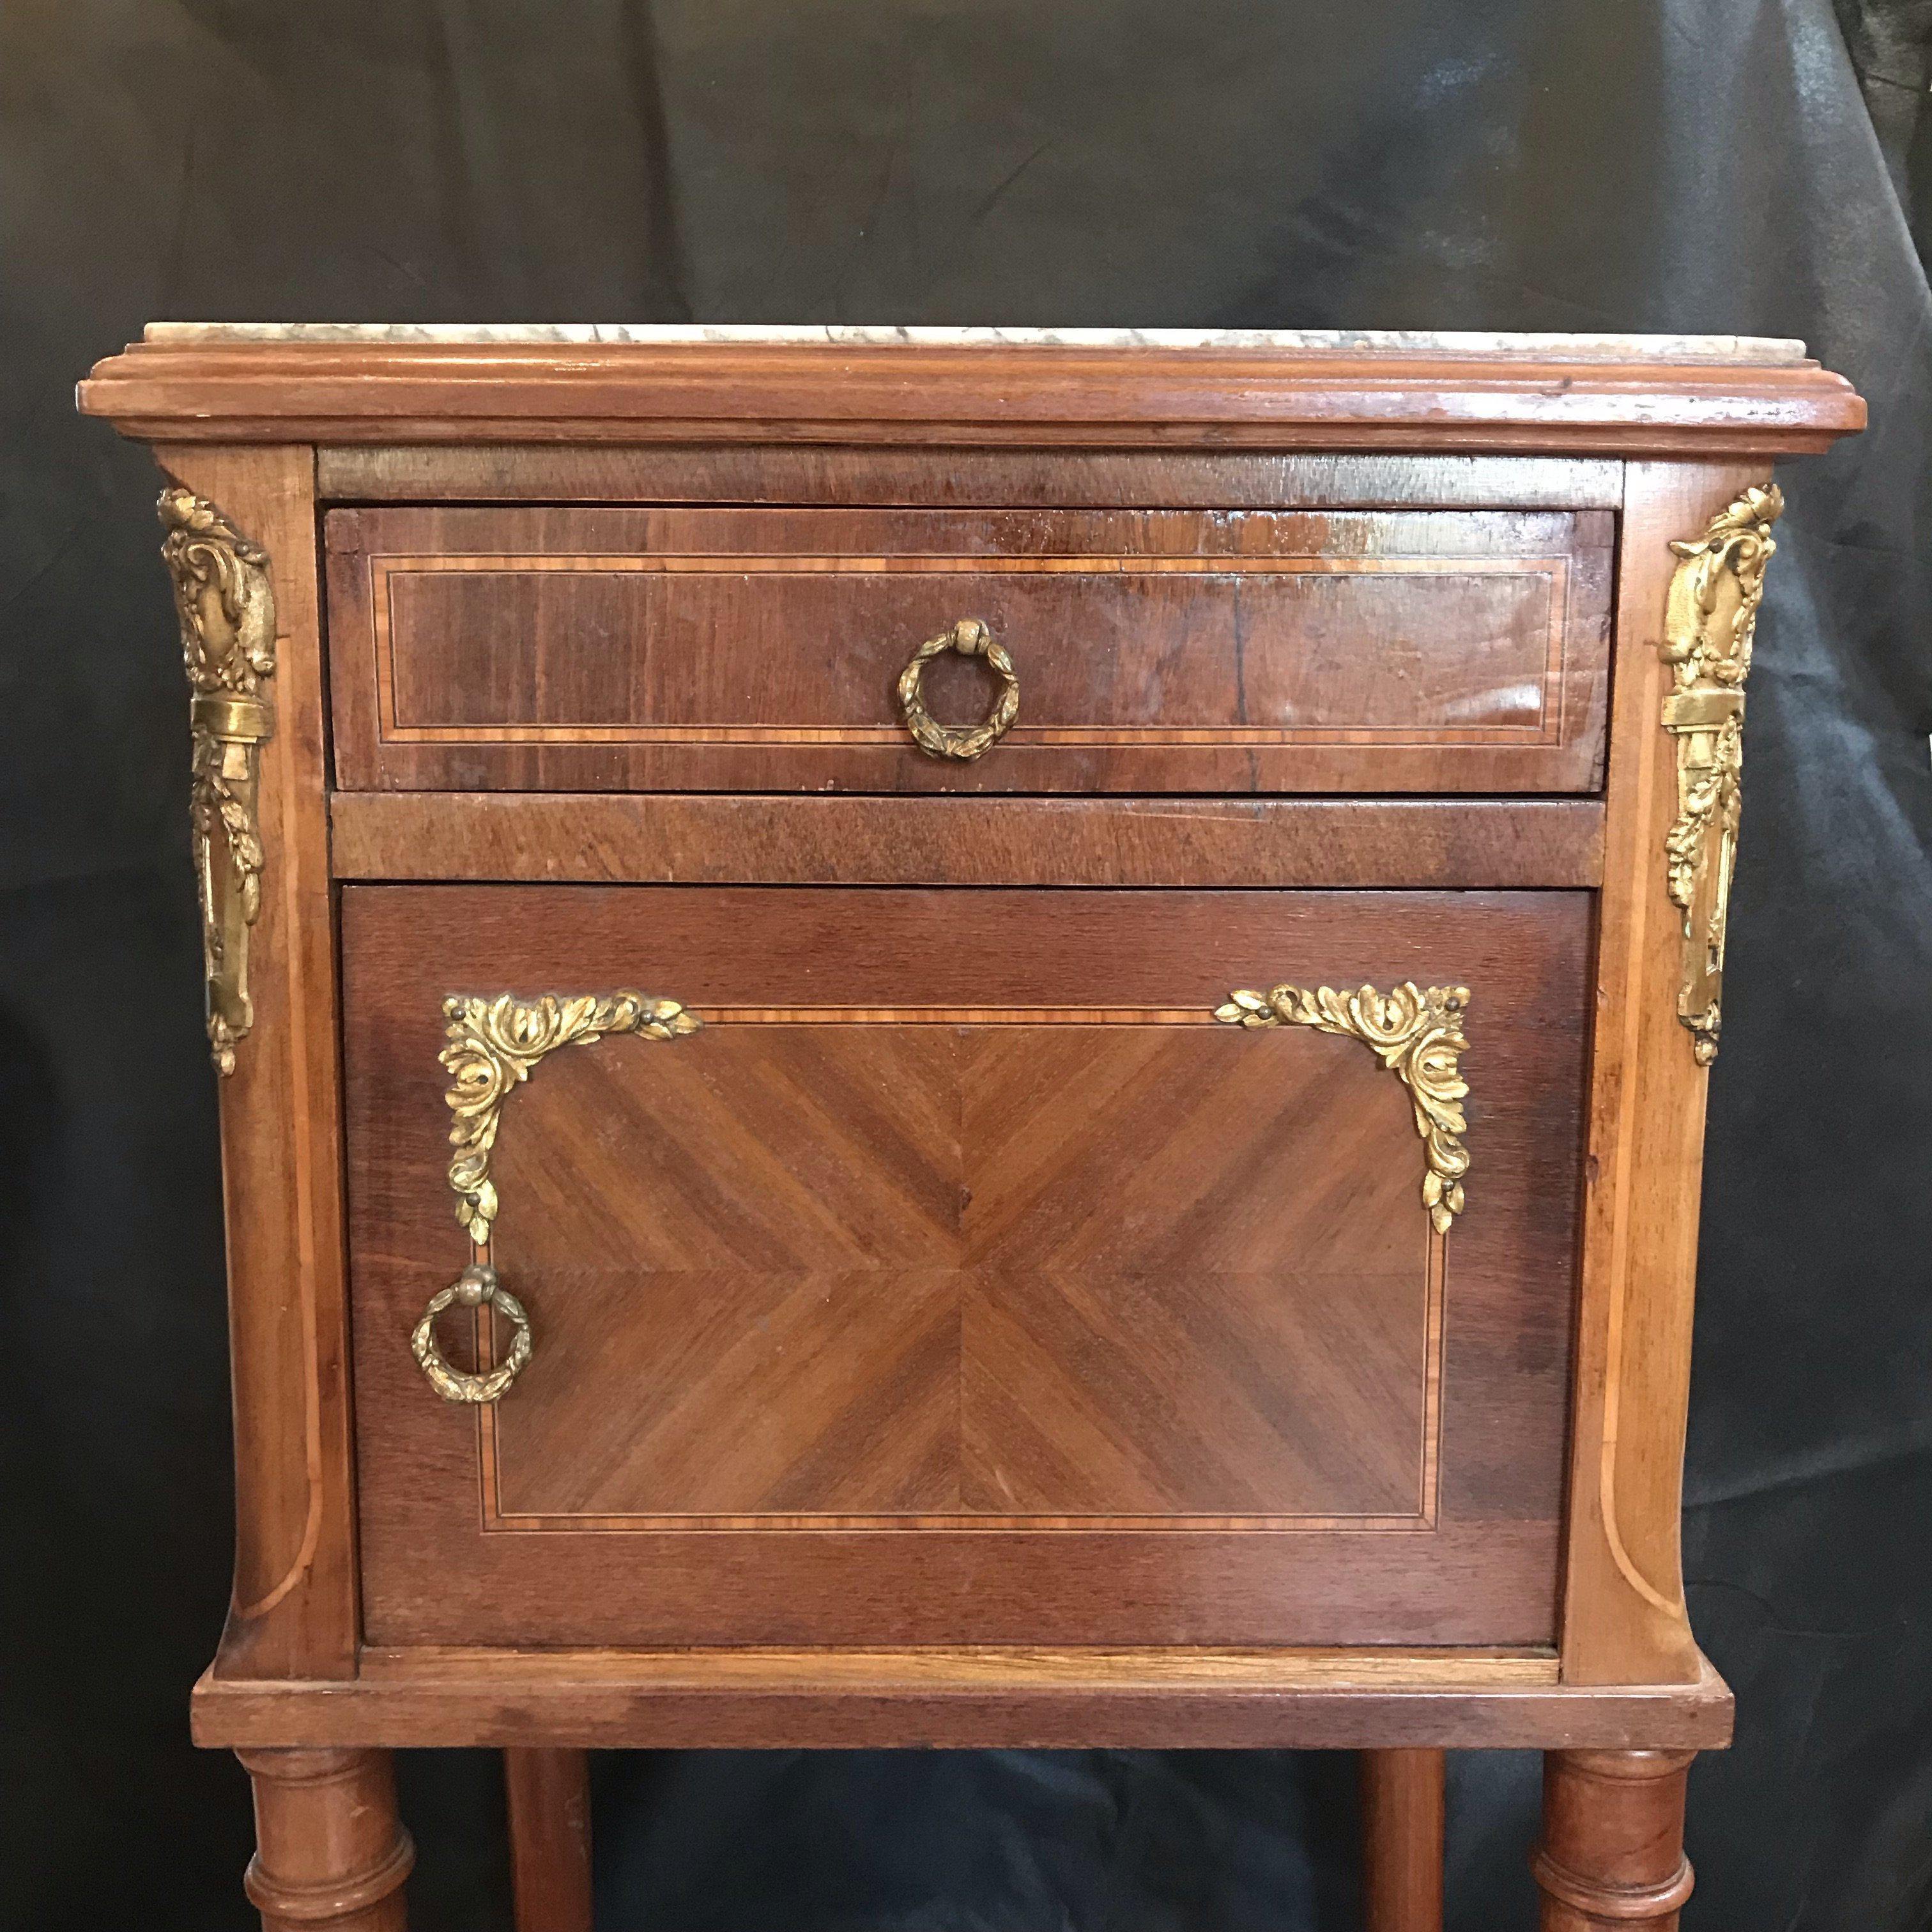 French mahogany and satinwood inlay night stand having gorgeous marble top, single drawer, brass pulls and accents. Minor veneer loss (see photos). Gorgeous marble interior behind single door. #4728.